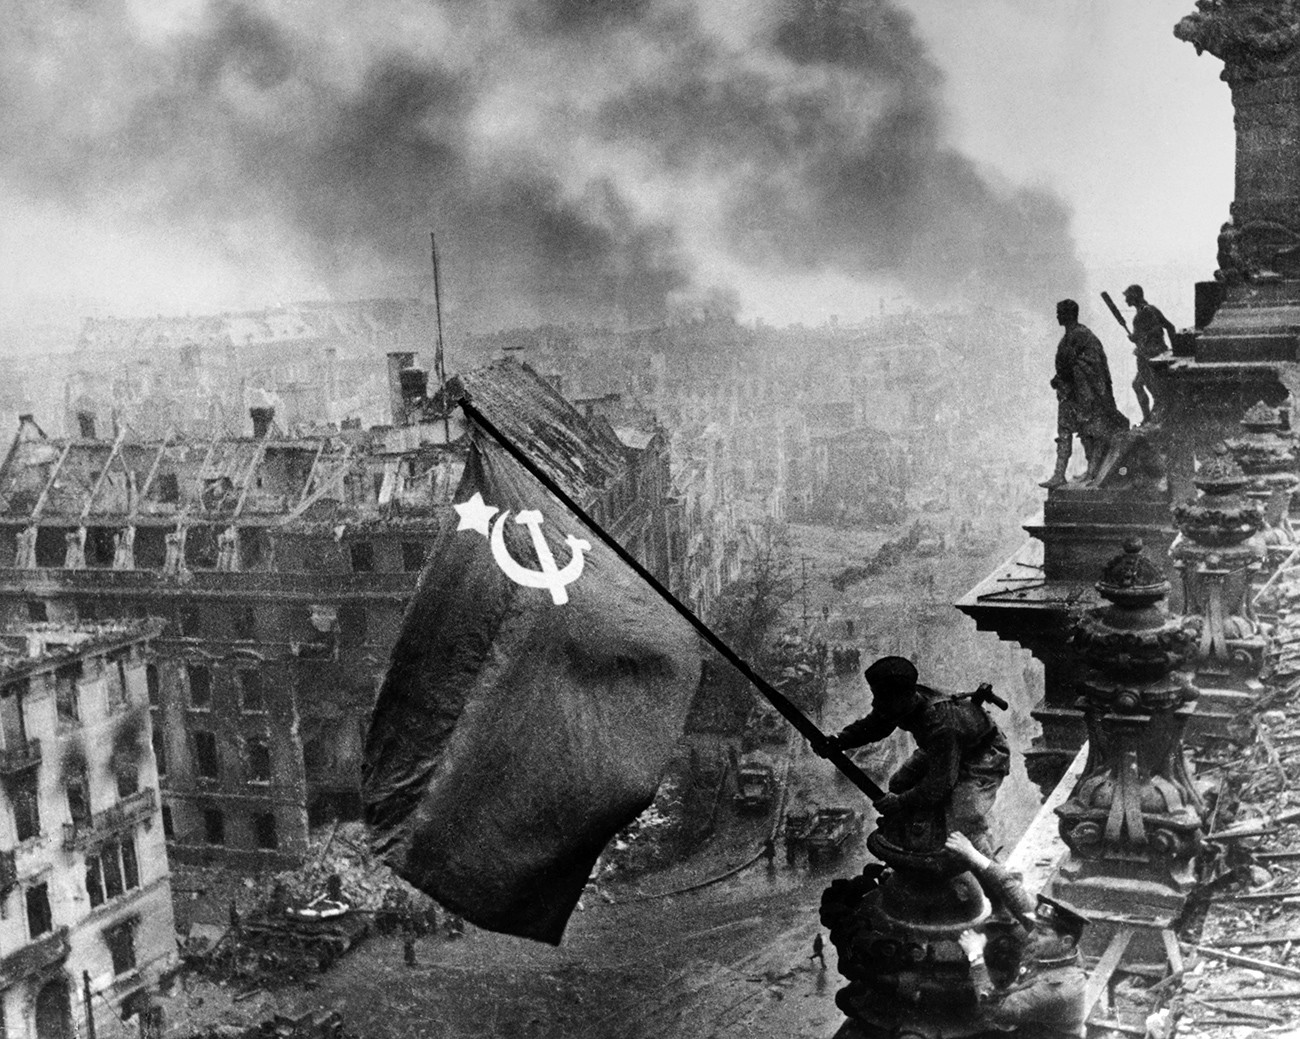  Victory Banner over the Reichstag. Berlin. 1945